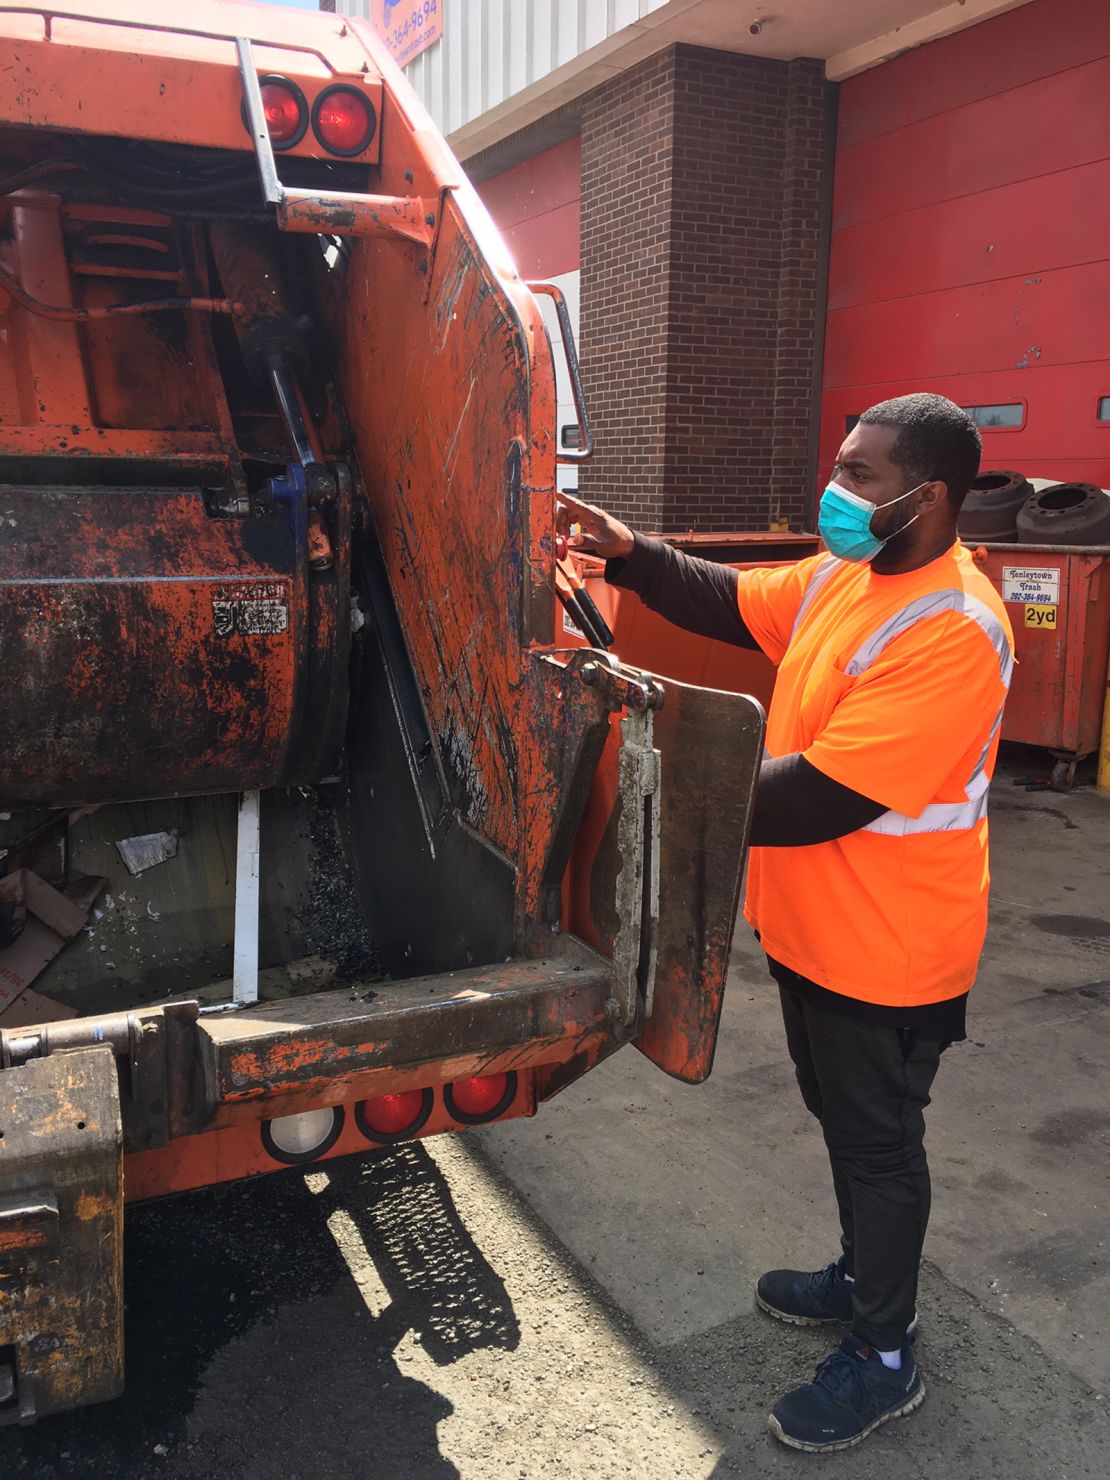 Tenleytown Trash workers are wearing masks made by the Washington National Opera's costume department.